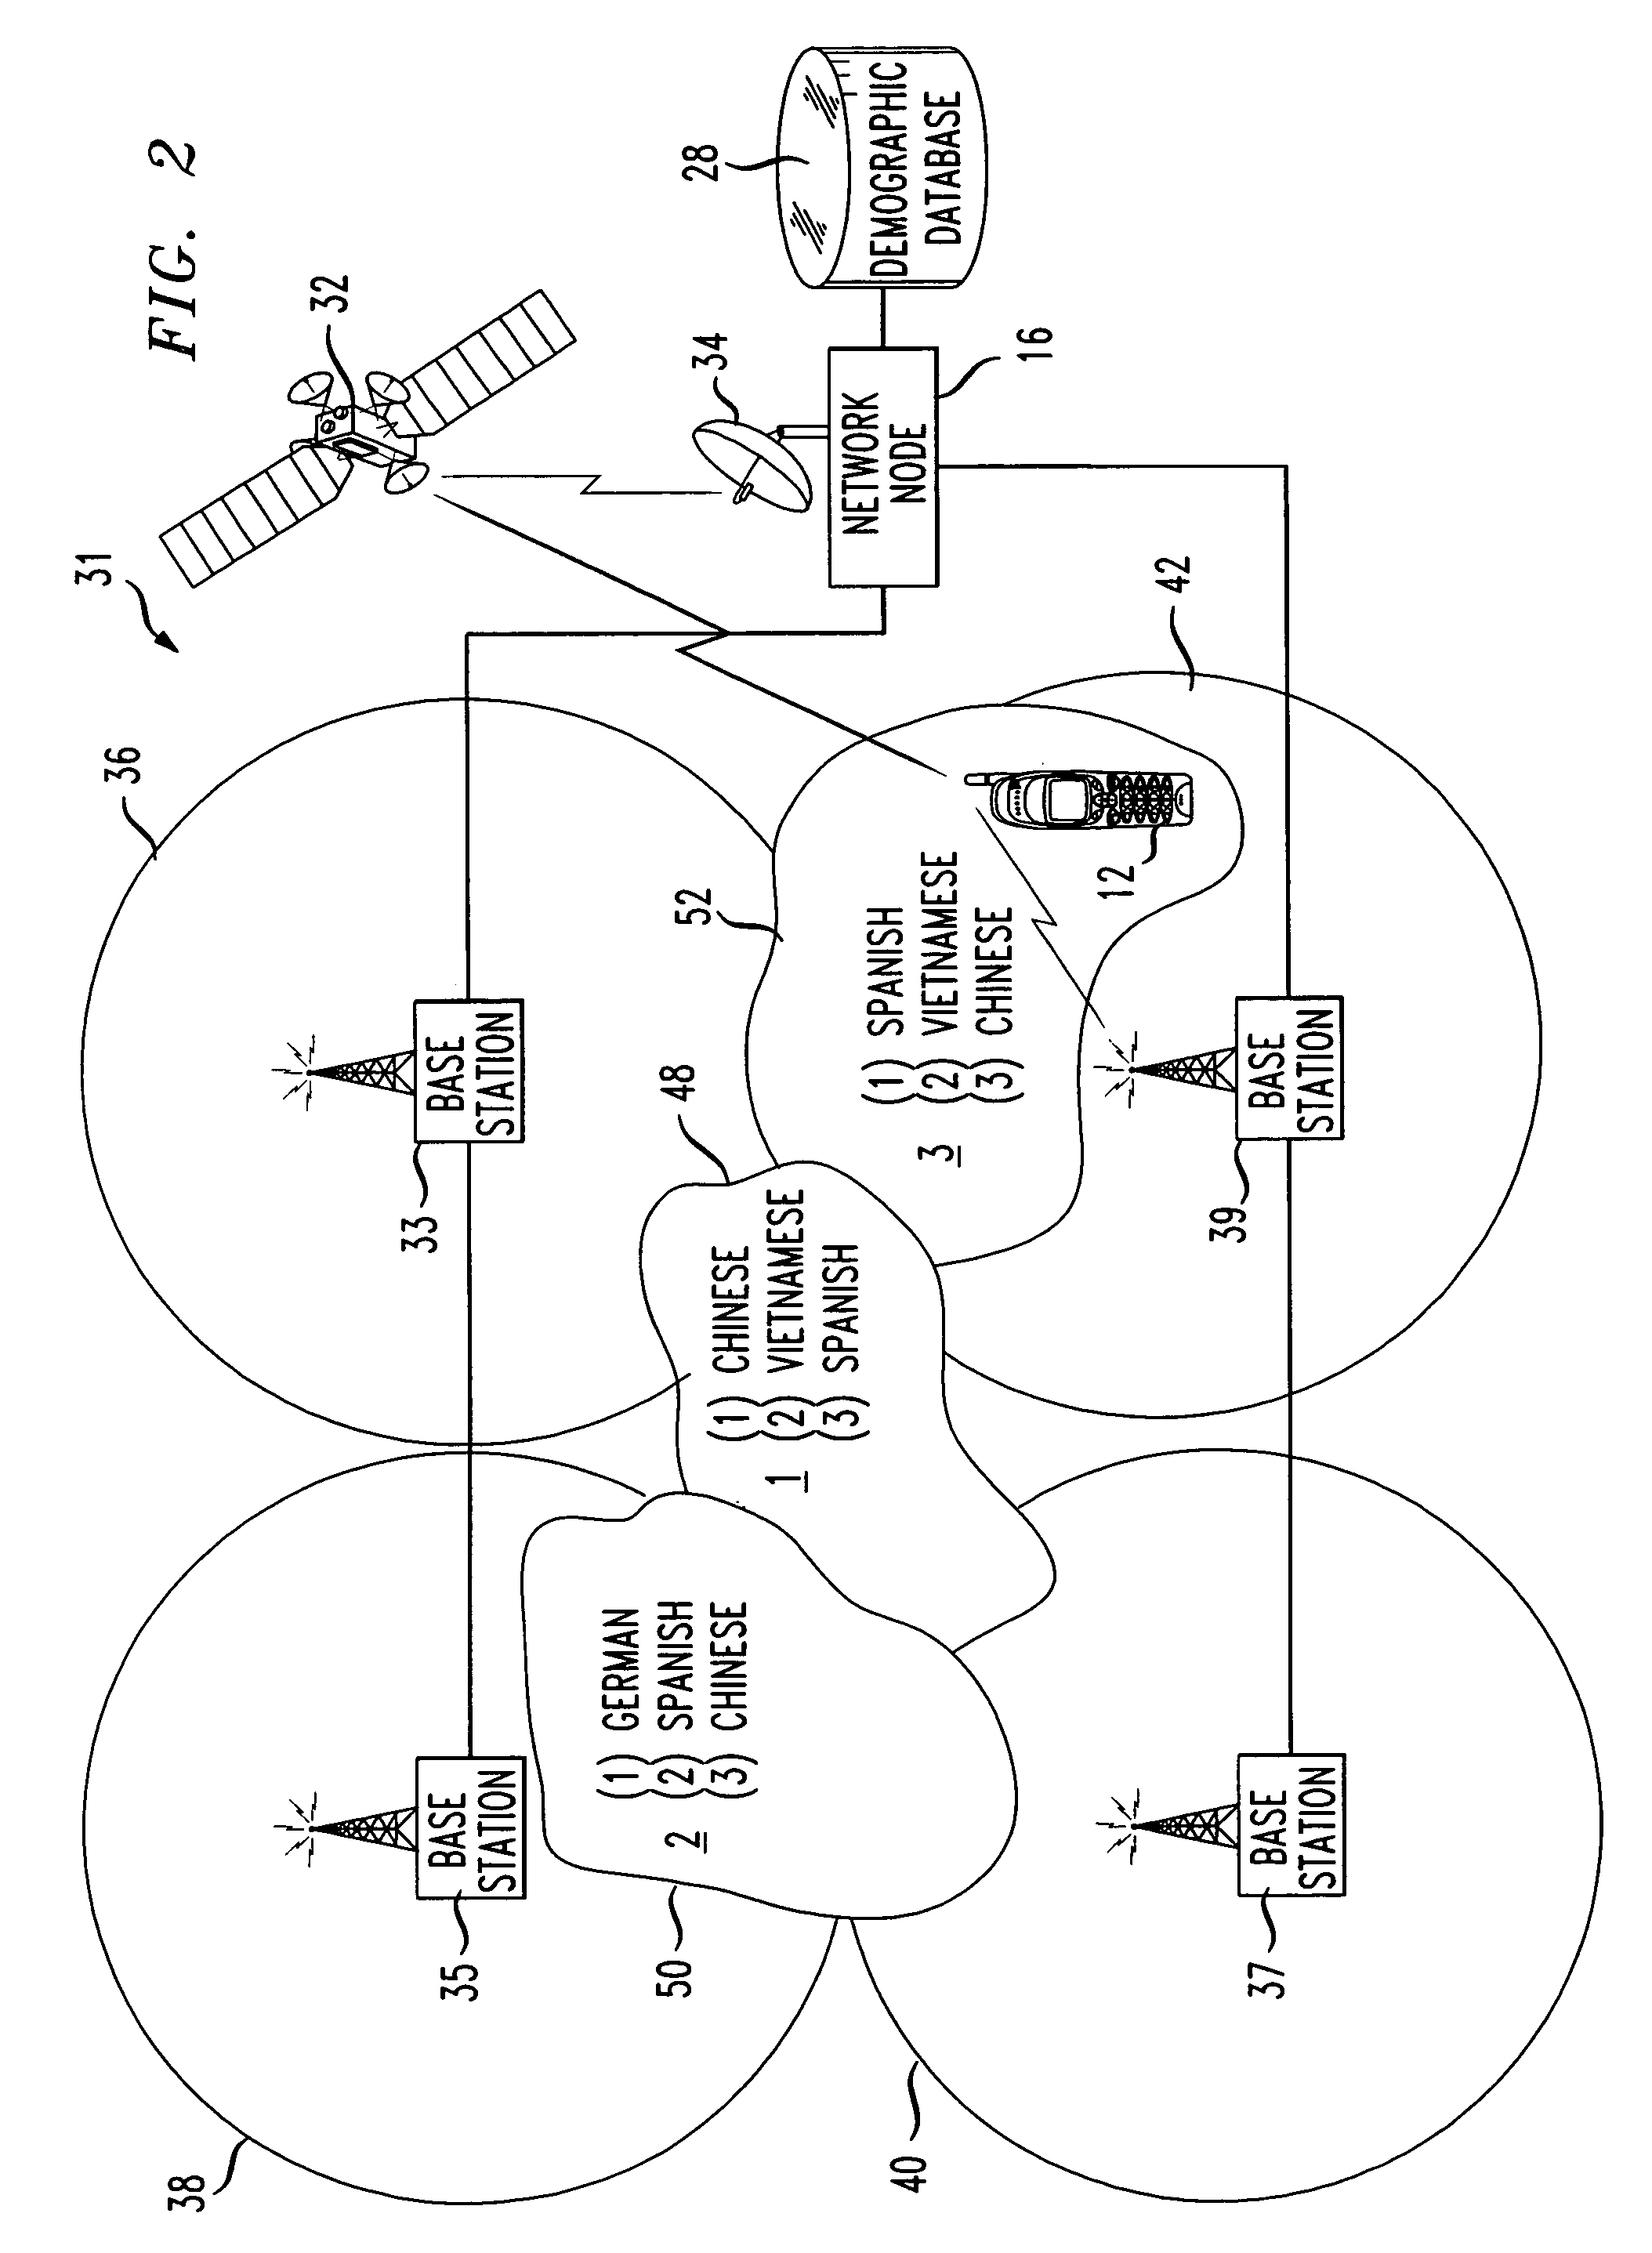 System and method of ubiquitous language translation for wireless devices